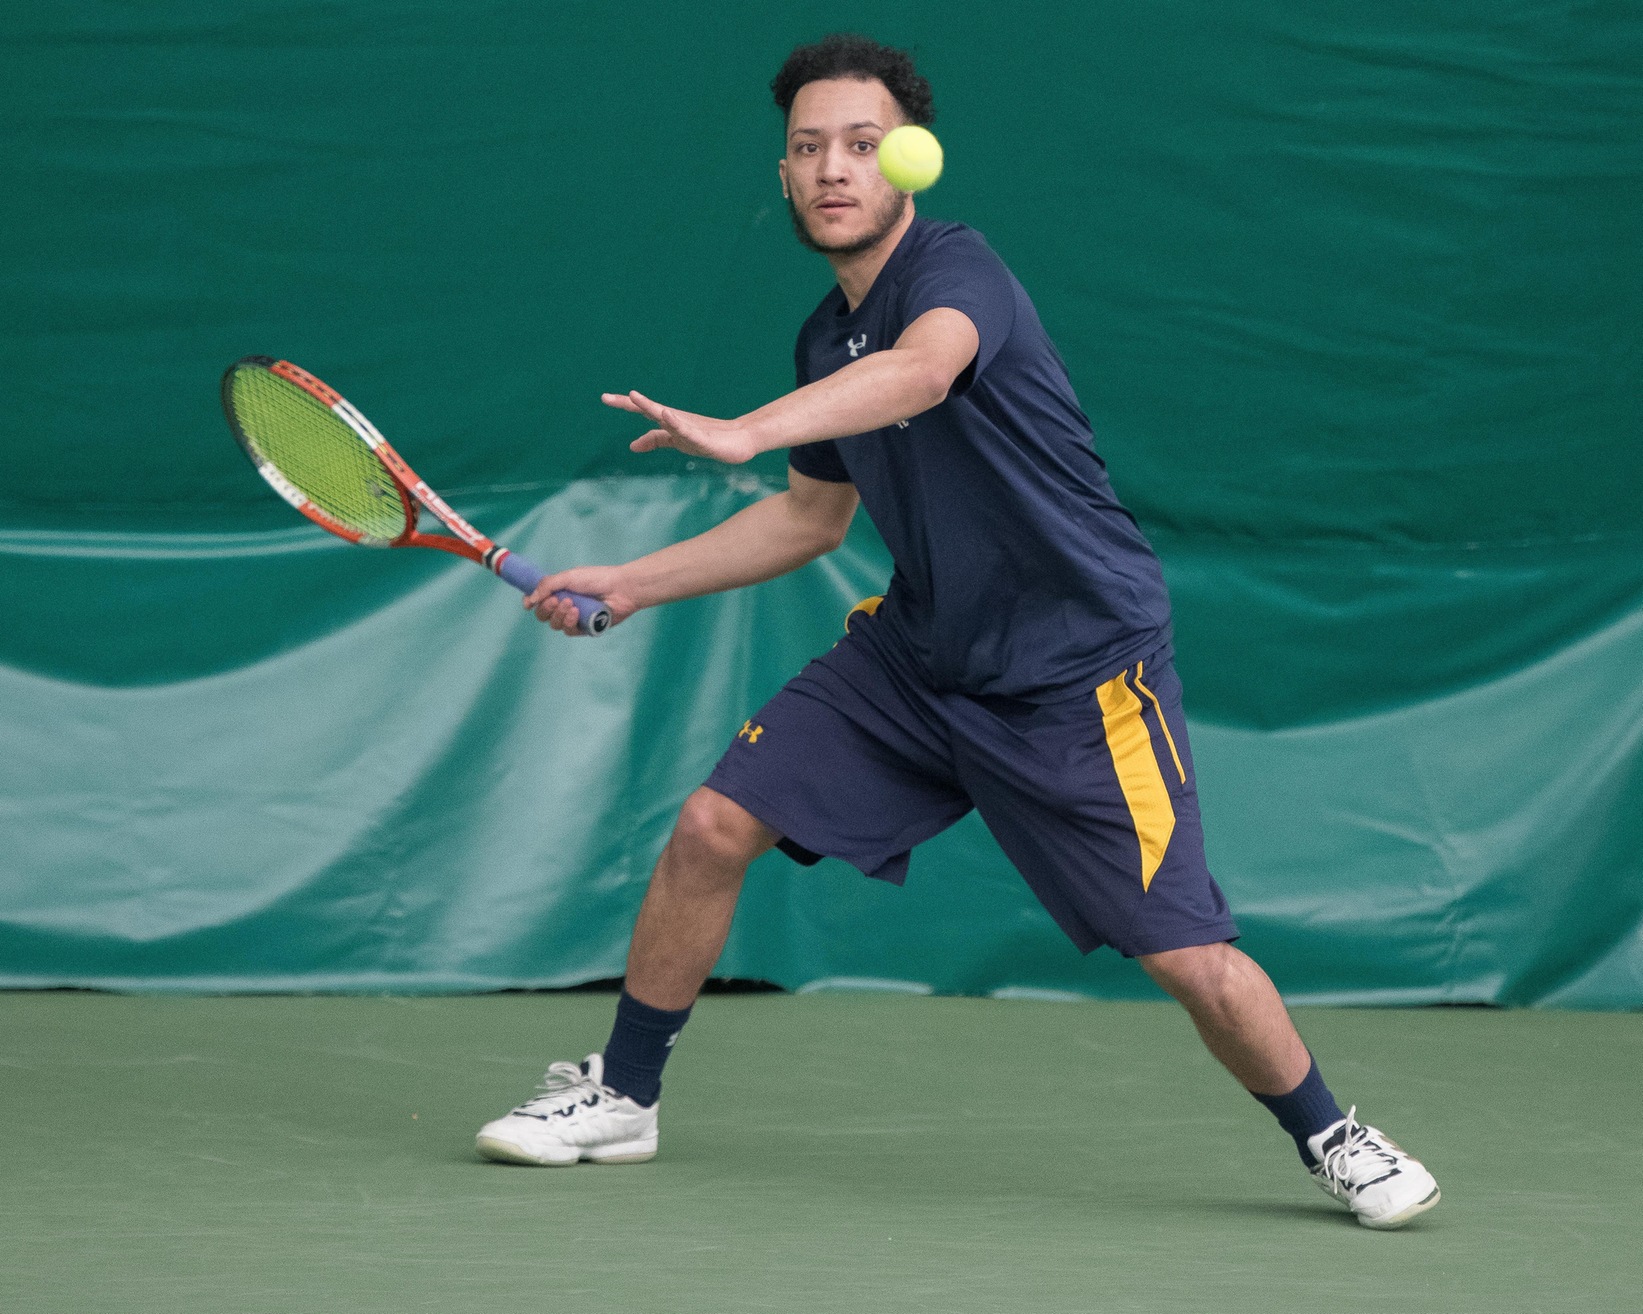 Mahrous, Castle singles play lifts MCLA to 5-4 comeback win over Castleton in Men's Tennis